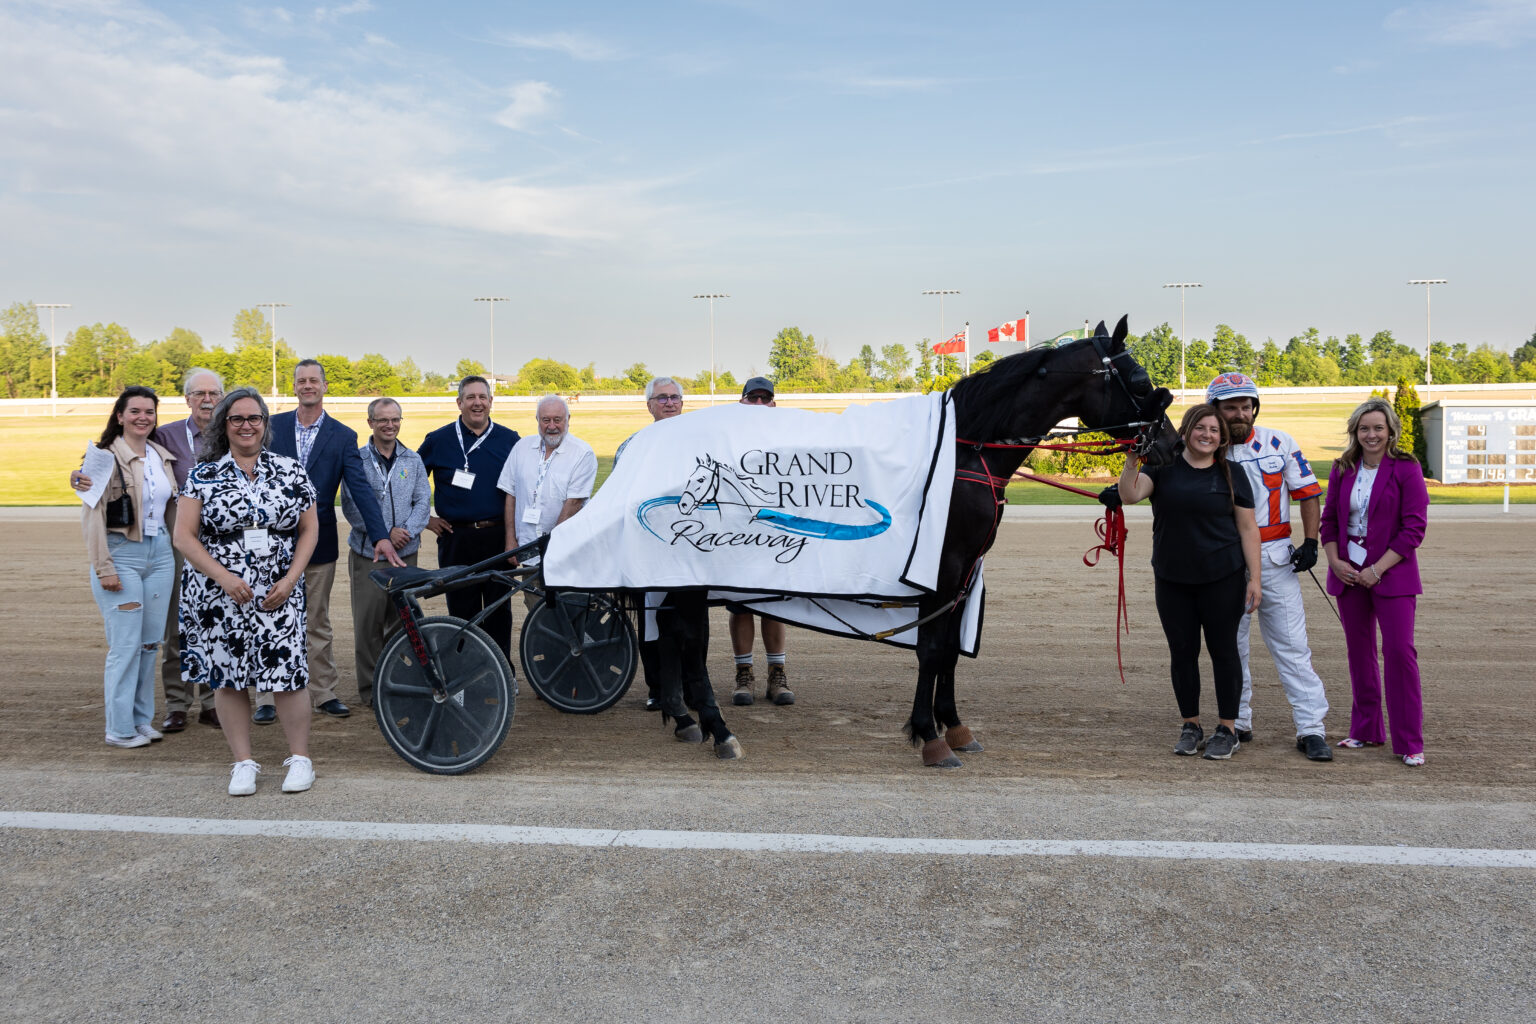 Grand River Raceway Celebrates Opening of New 5/8 Mile Racetrack